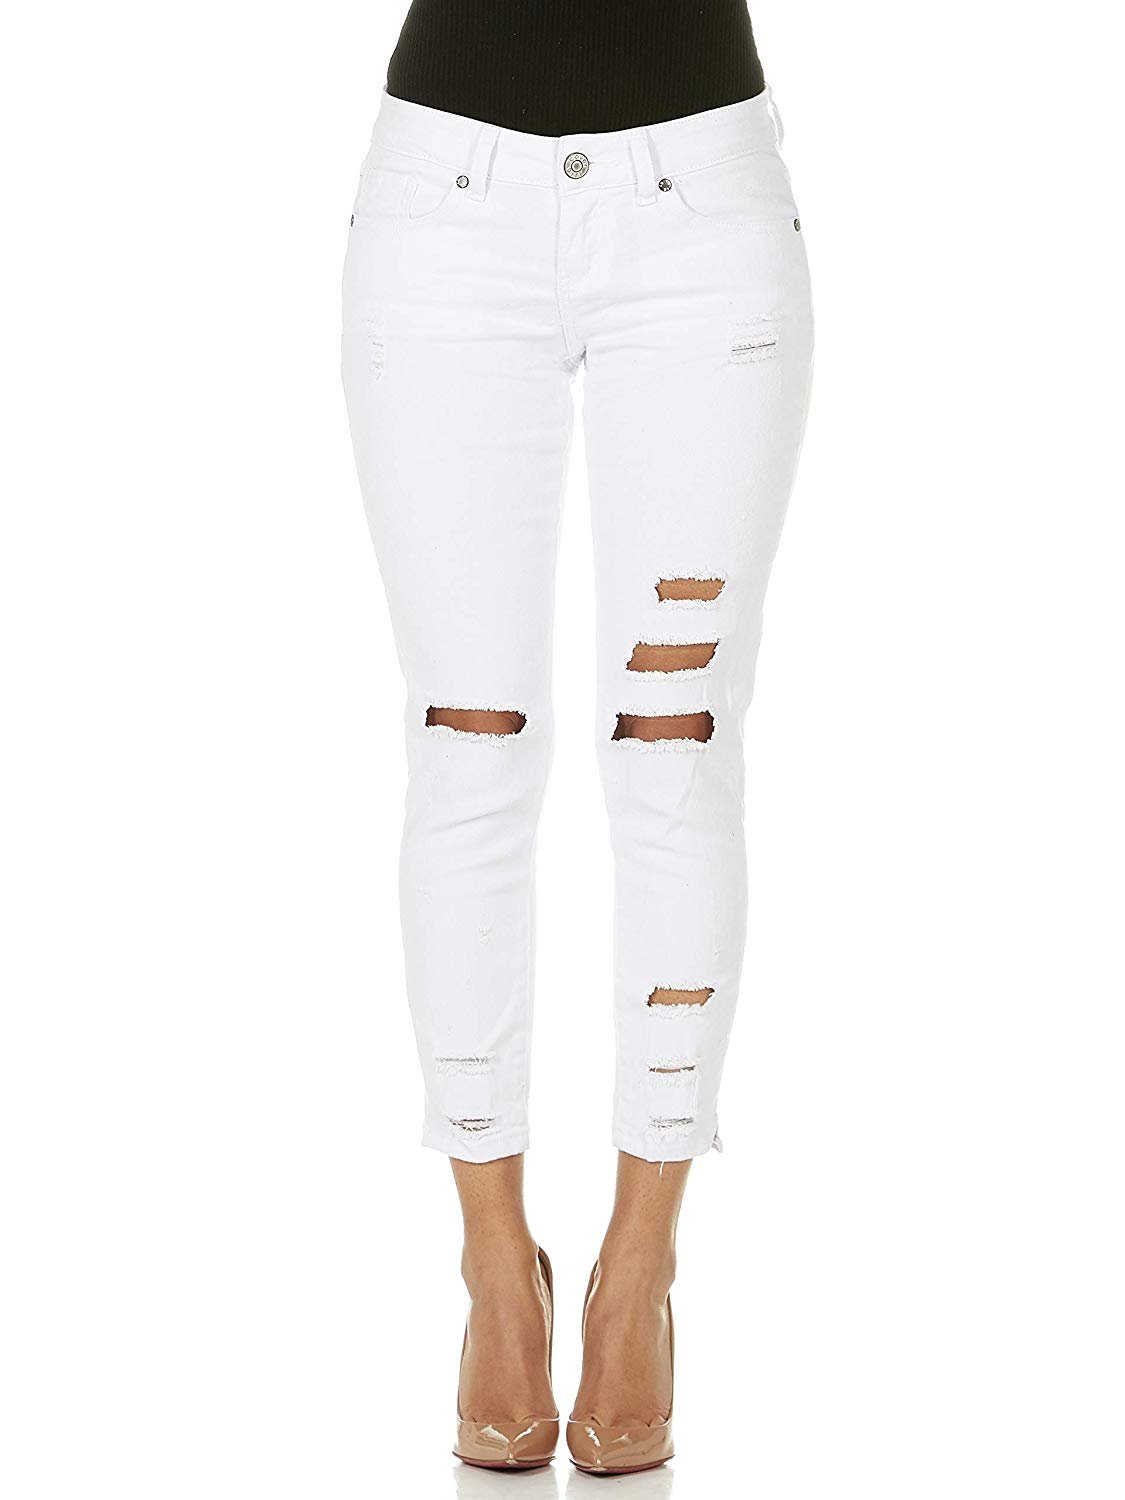 CG JEANS Plus Size Cute Juniors Big Mid Rise Large Ripped Torn Crop Skinny Fit, White Denim 24 - image 1 of 7